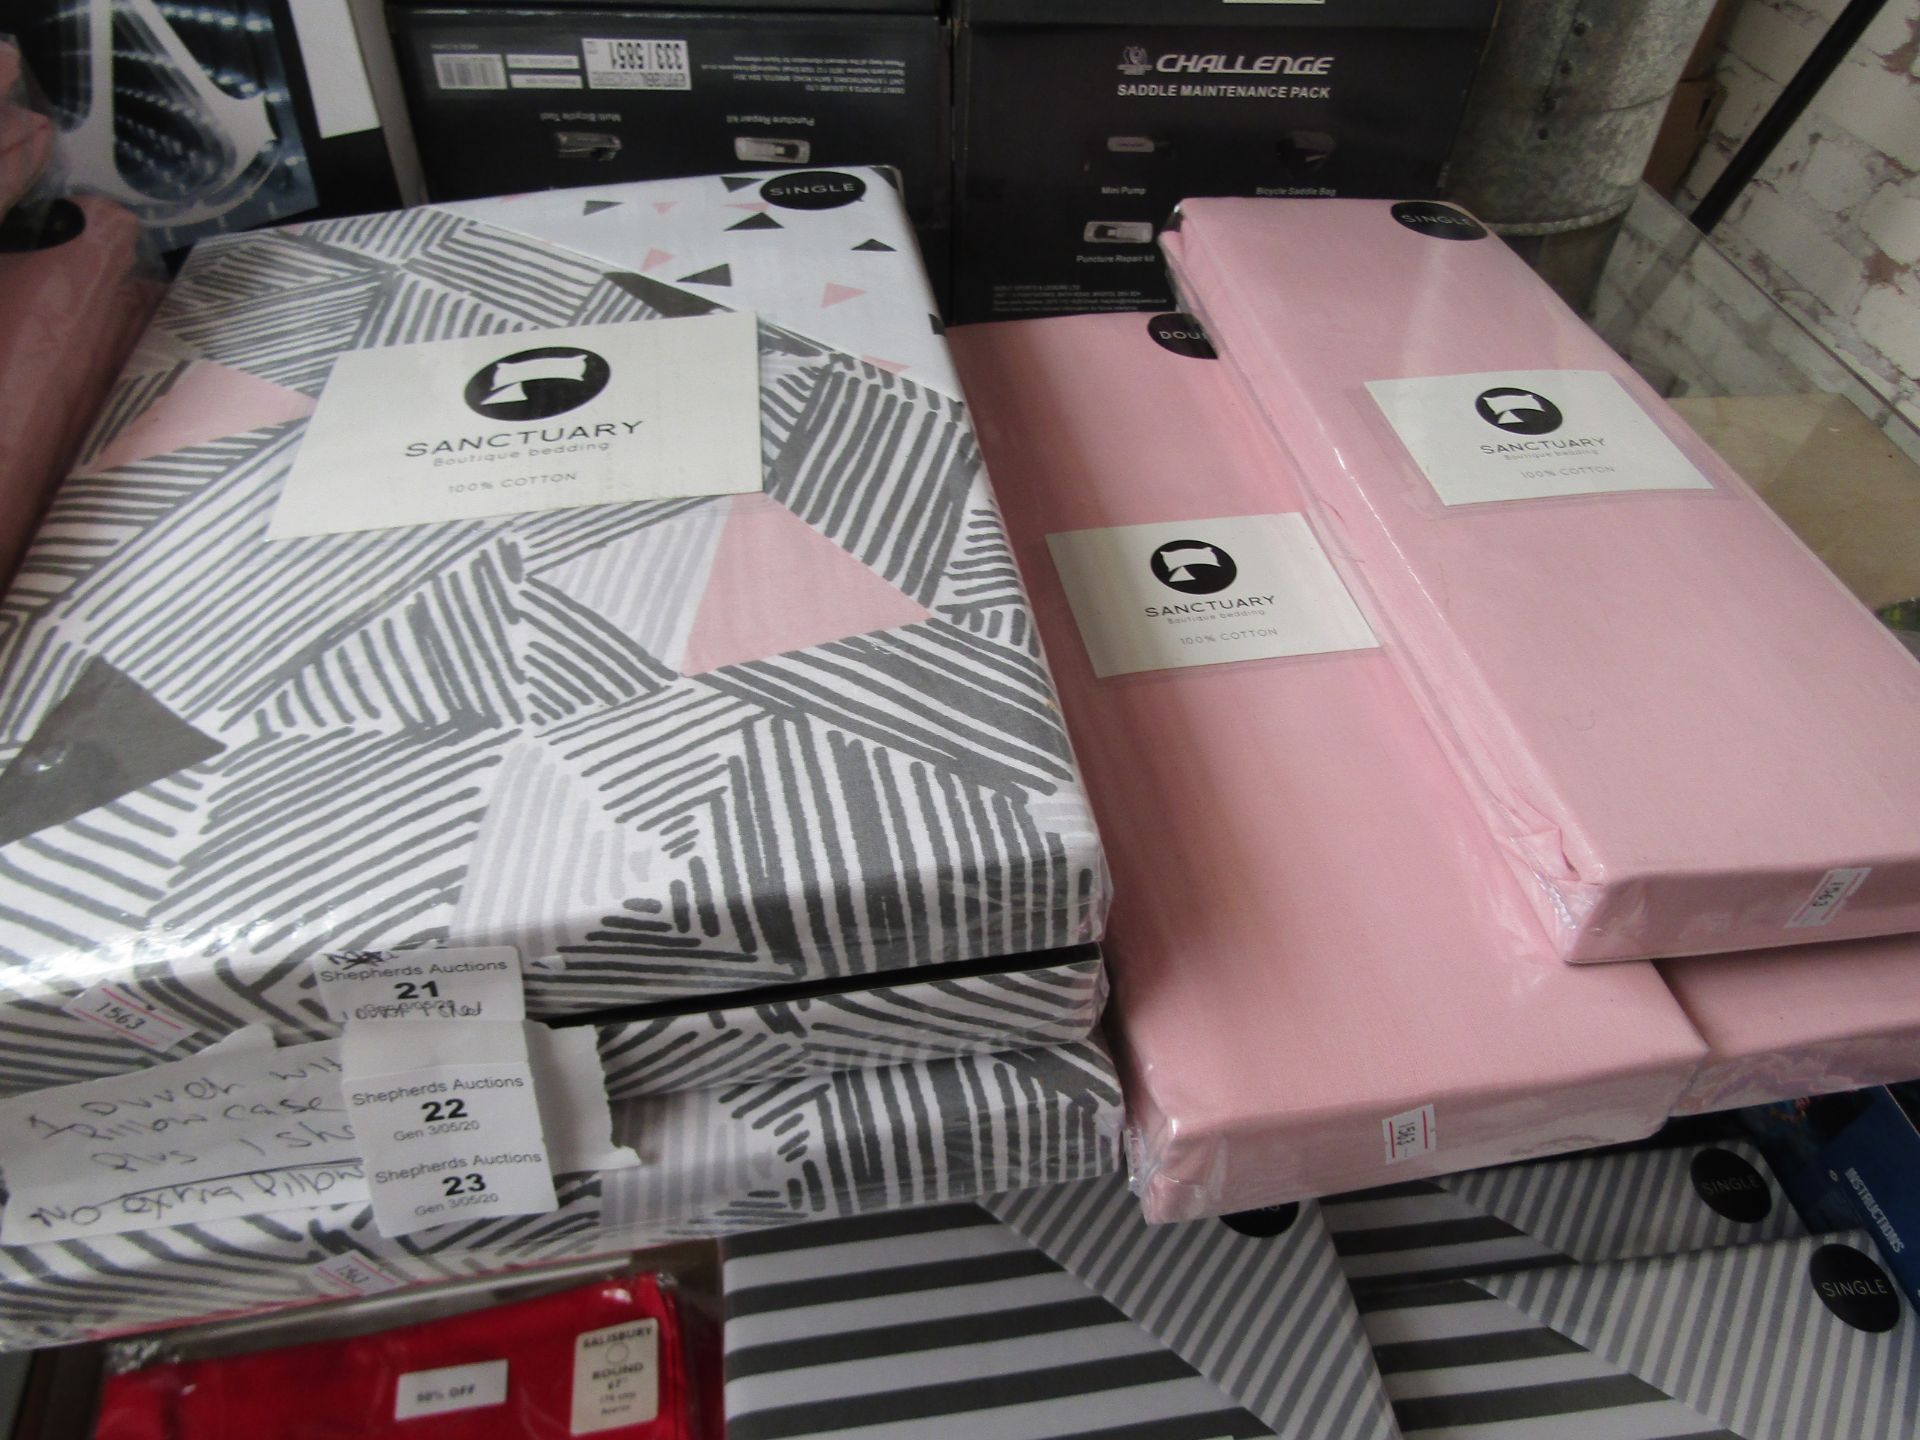 Santuary Bailey Single Bedding set that includes Duvet cover, Pillow Case & Deep Box Fitted Sheet.